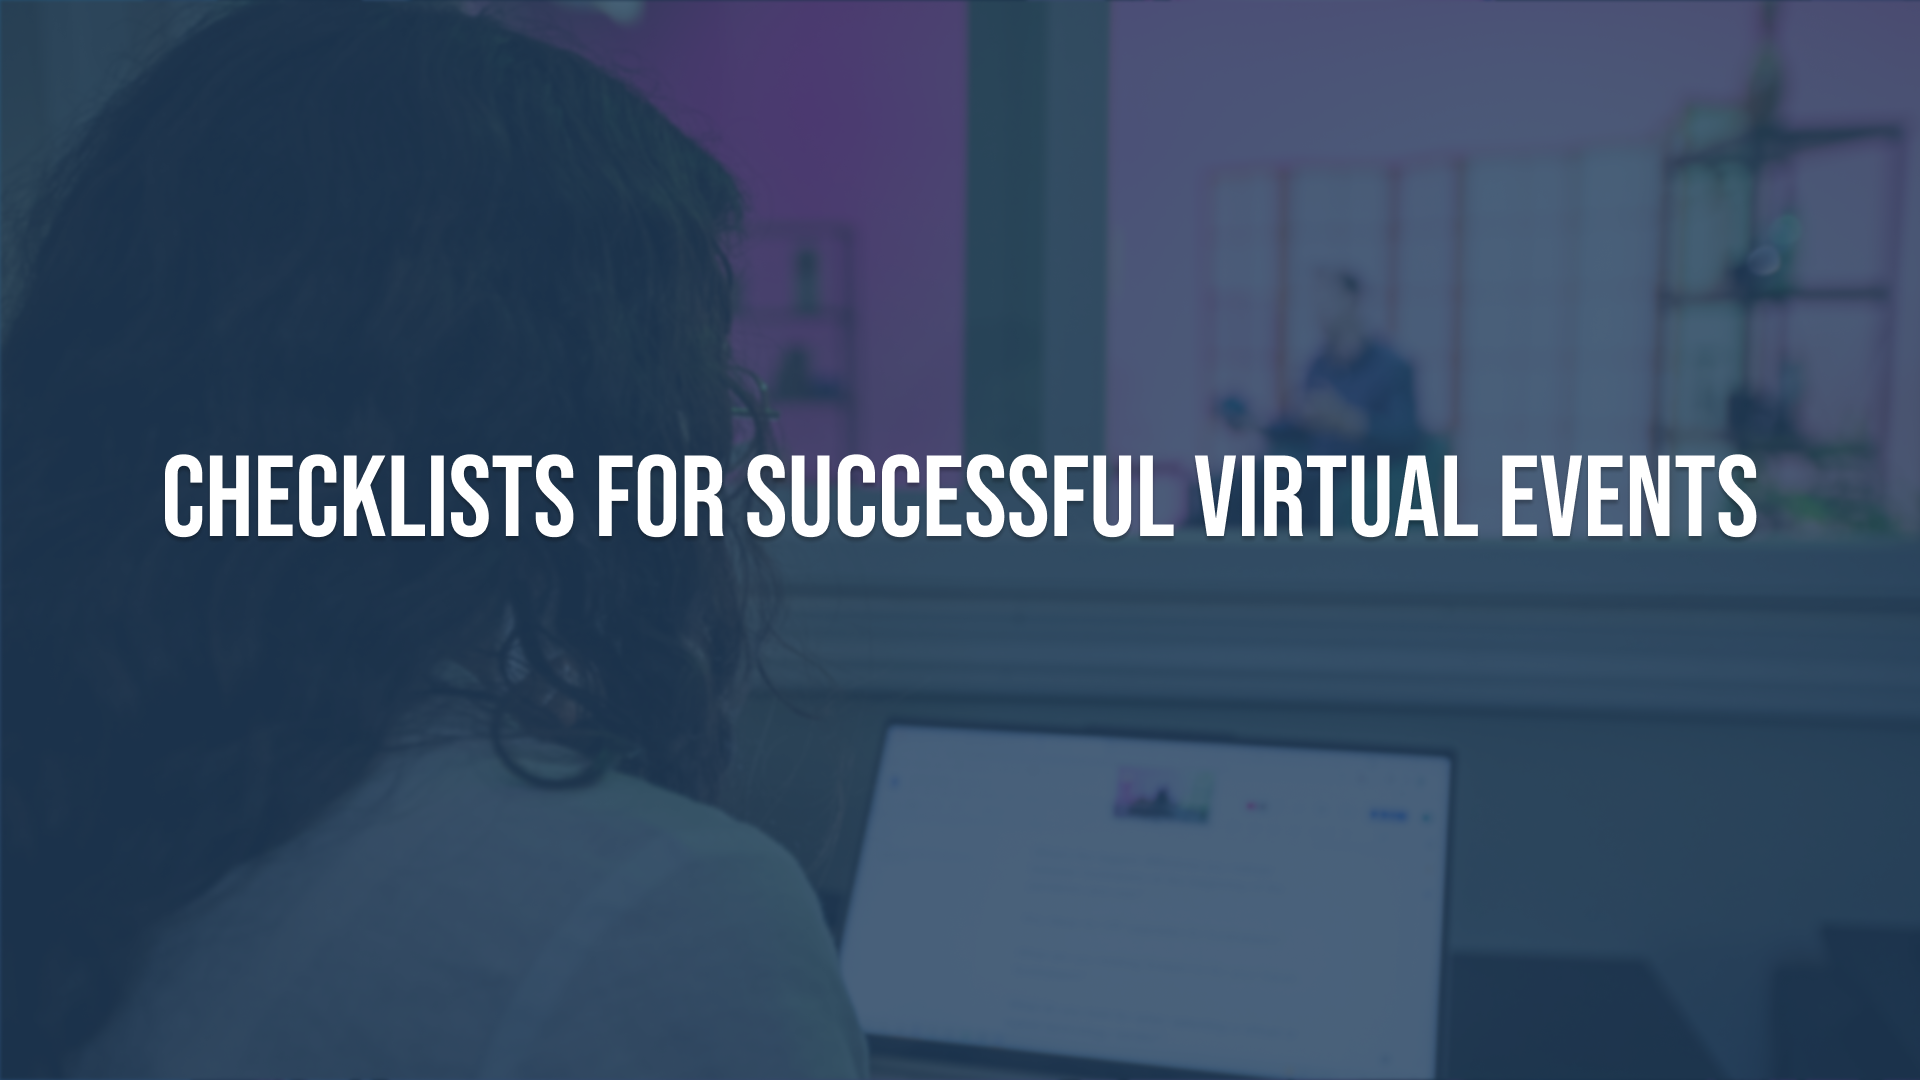 Our Checklists for Successful Virtual Events